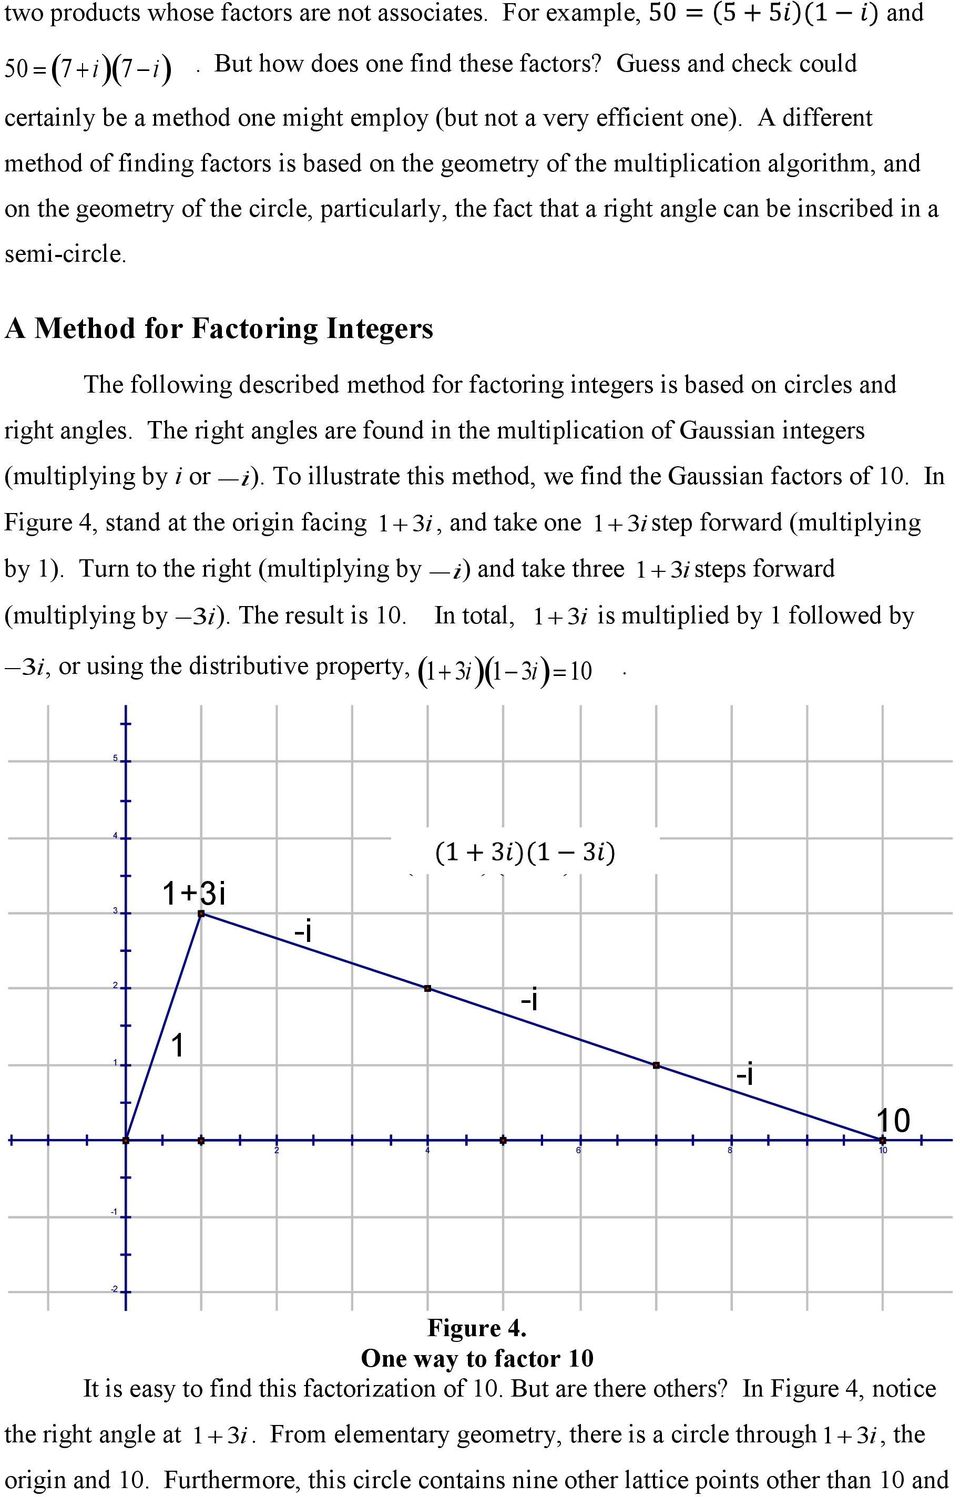 A different method of finding factors is based on the geometry of the multiplication algorithm, and on the geometry of the circle, particularly, the fact that a right angle can be inscribed in a